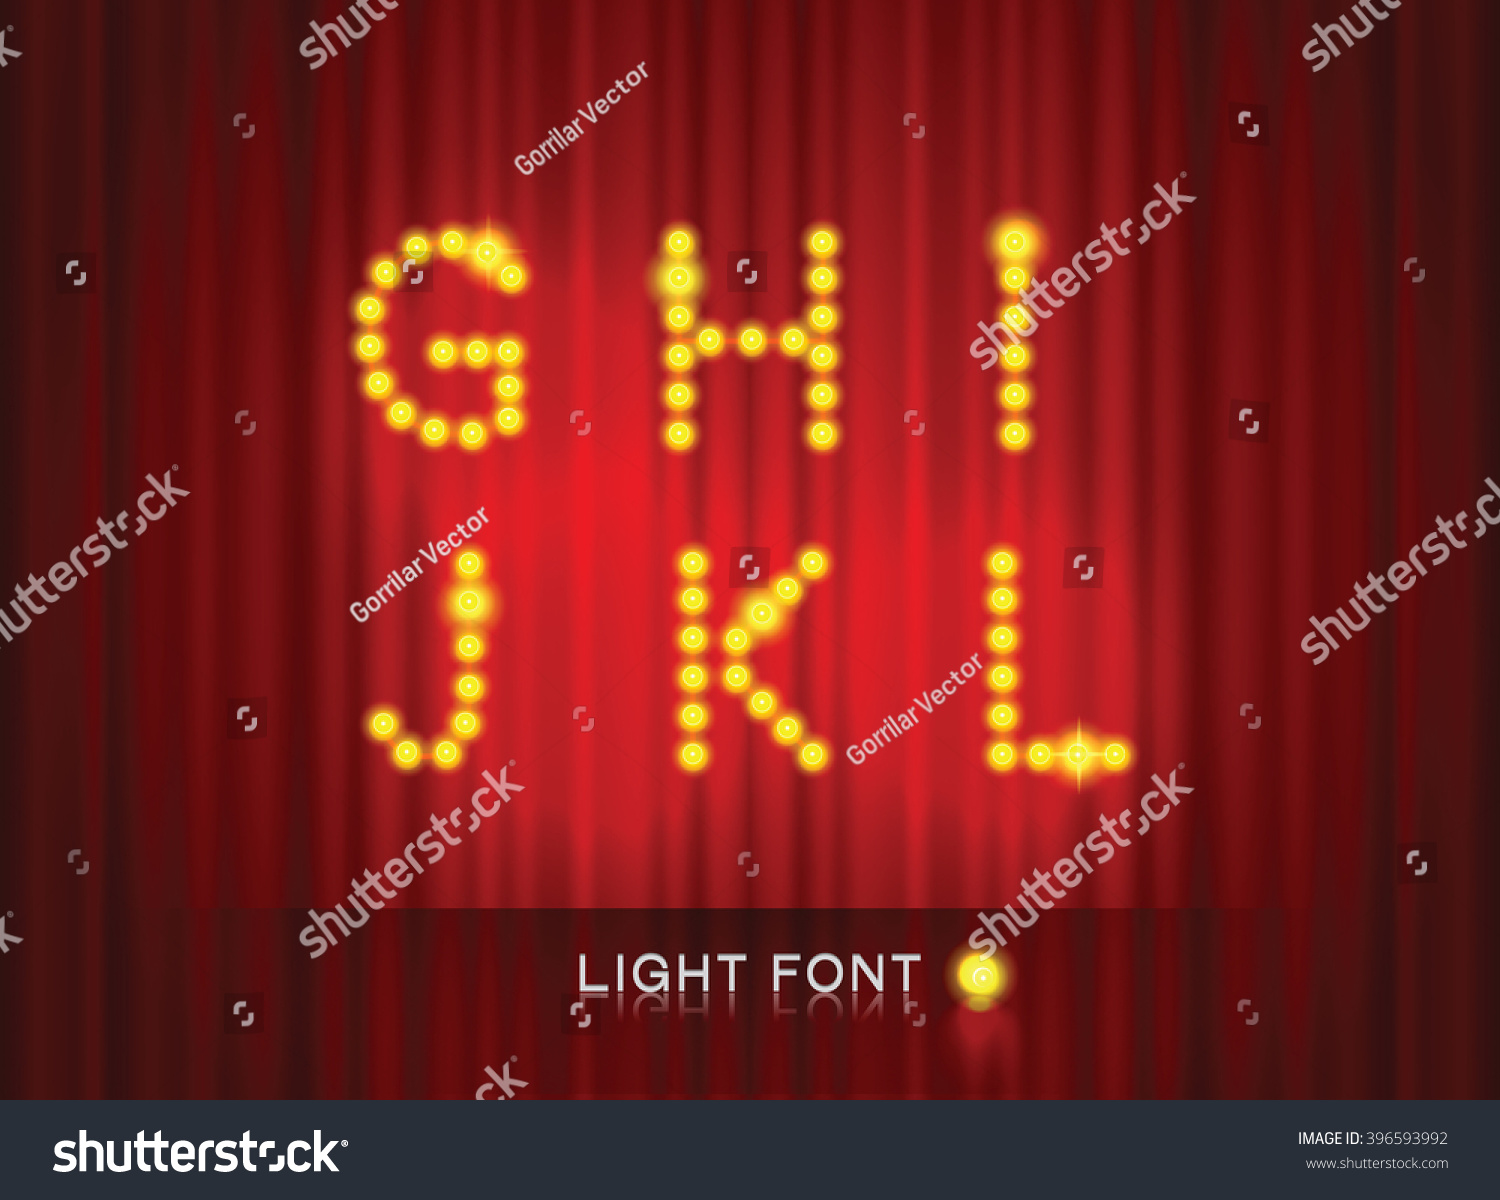 Light Font On Stage Curtain Background Stock Vector (Royalty Free ...